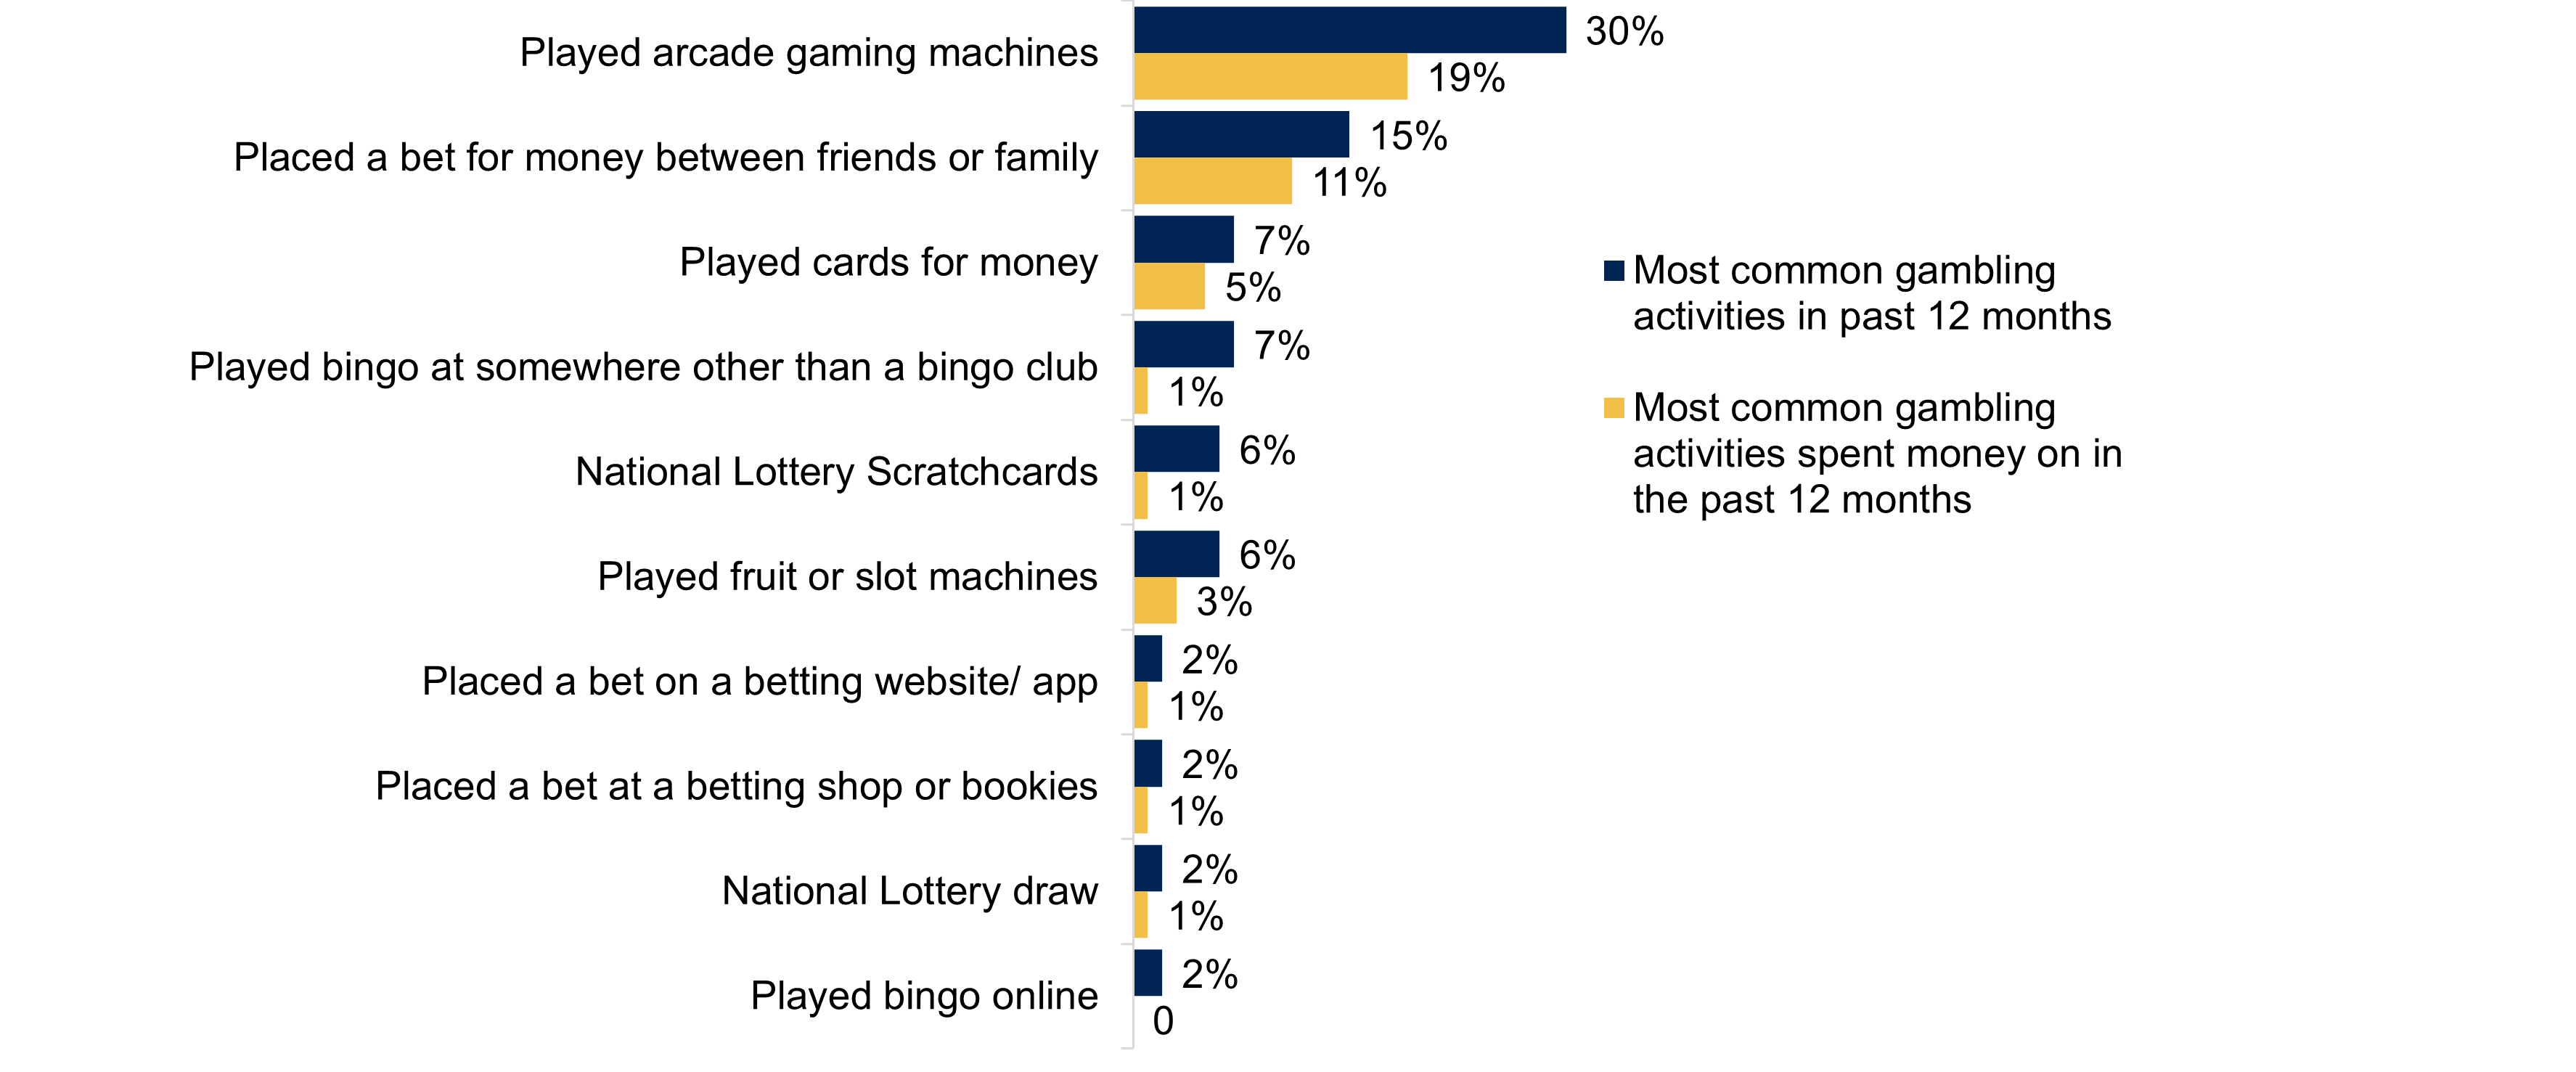 A bar chart showing the top ten most common gambling activities among young people in the past 12 months. For each activity there are two bars. One bar represents the percentage of the most common gambling activities in the past 12 months, another bar represents most common gambling activities spent money on in the past 12 months. Data from the chart is provided within the following table.